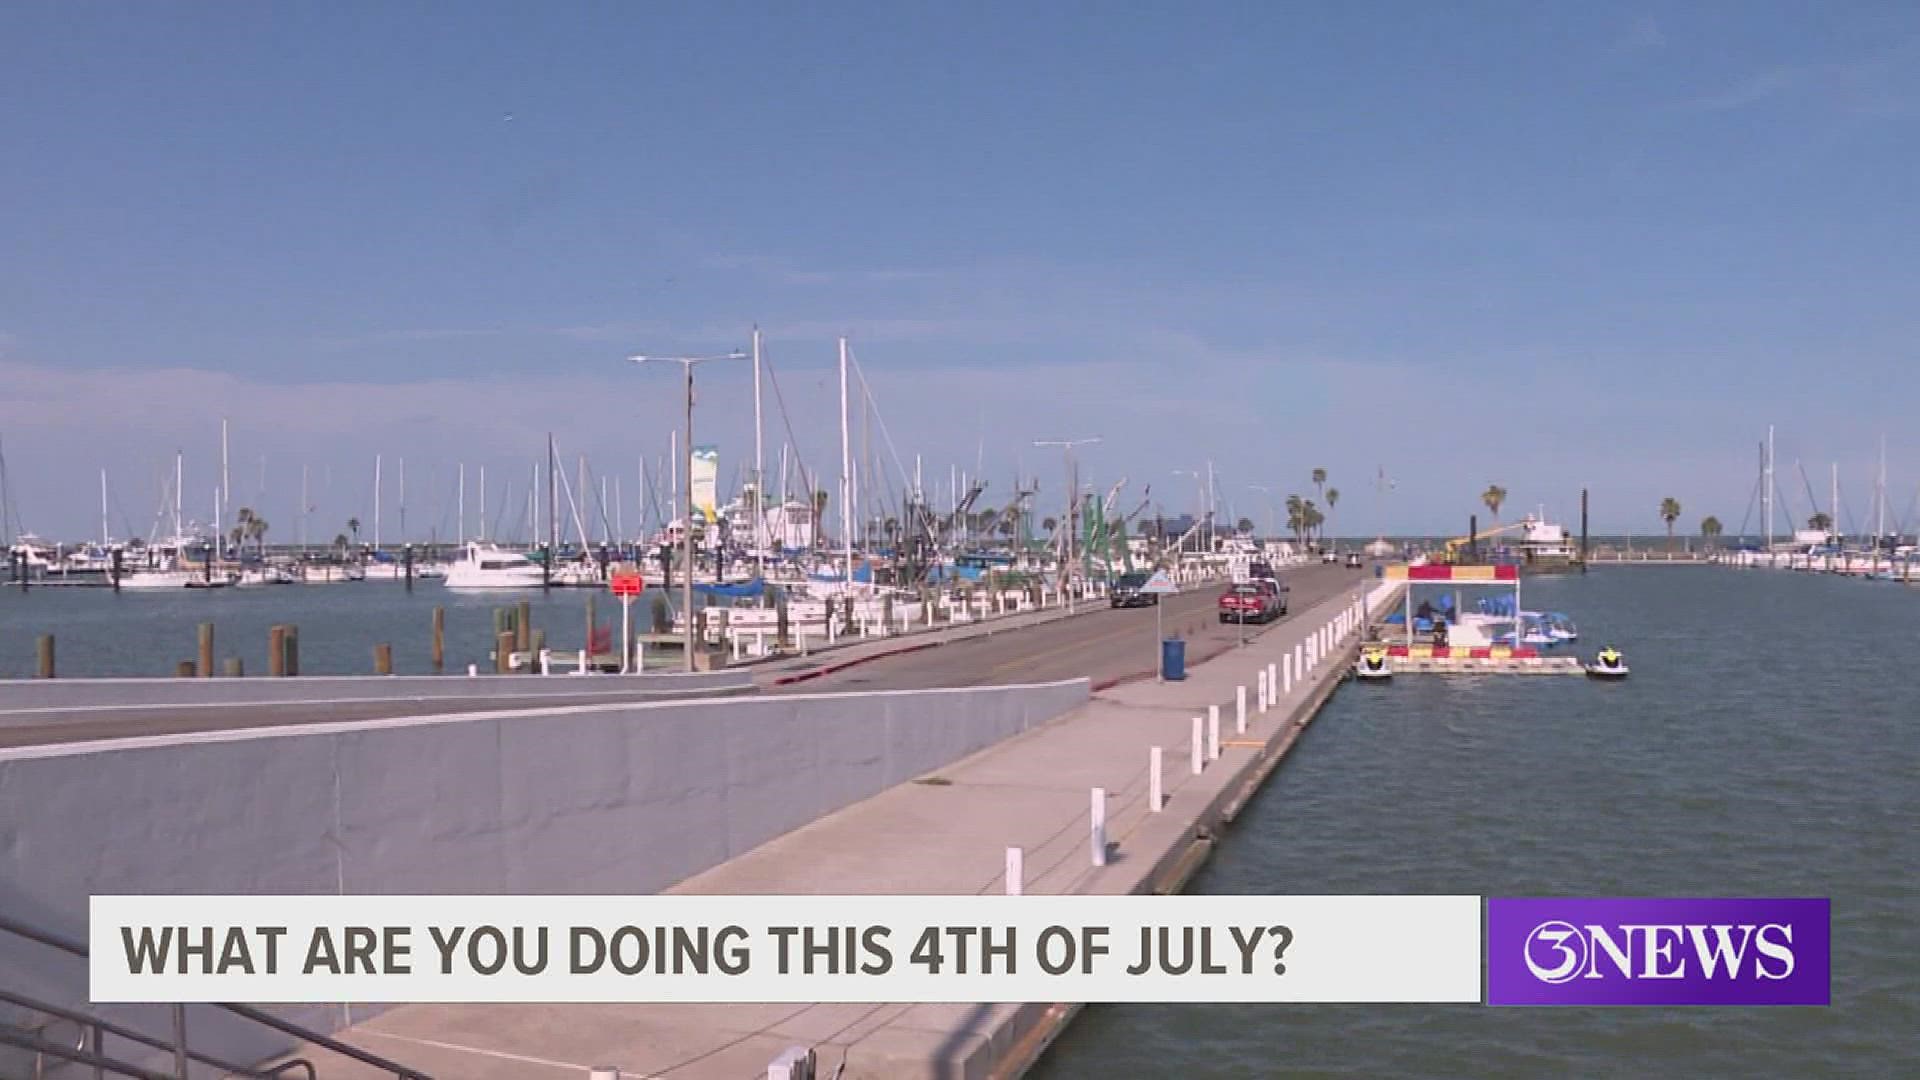 3NEWS spoke with residents about what they plan to do this holiday weekend.